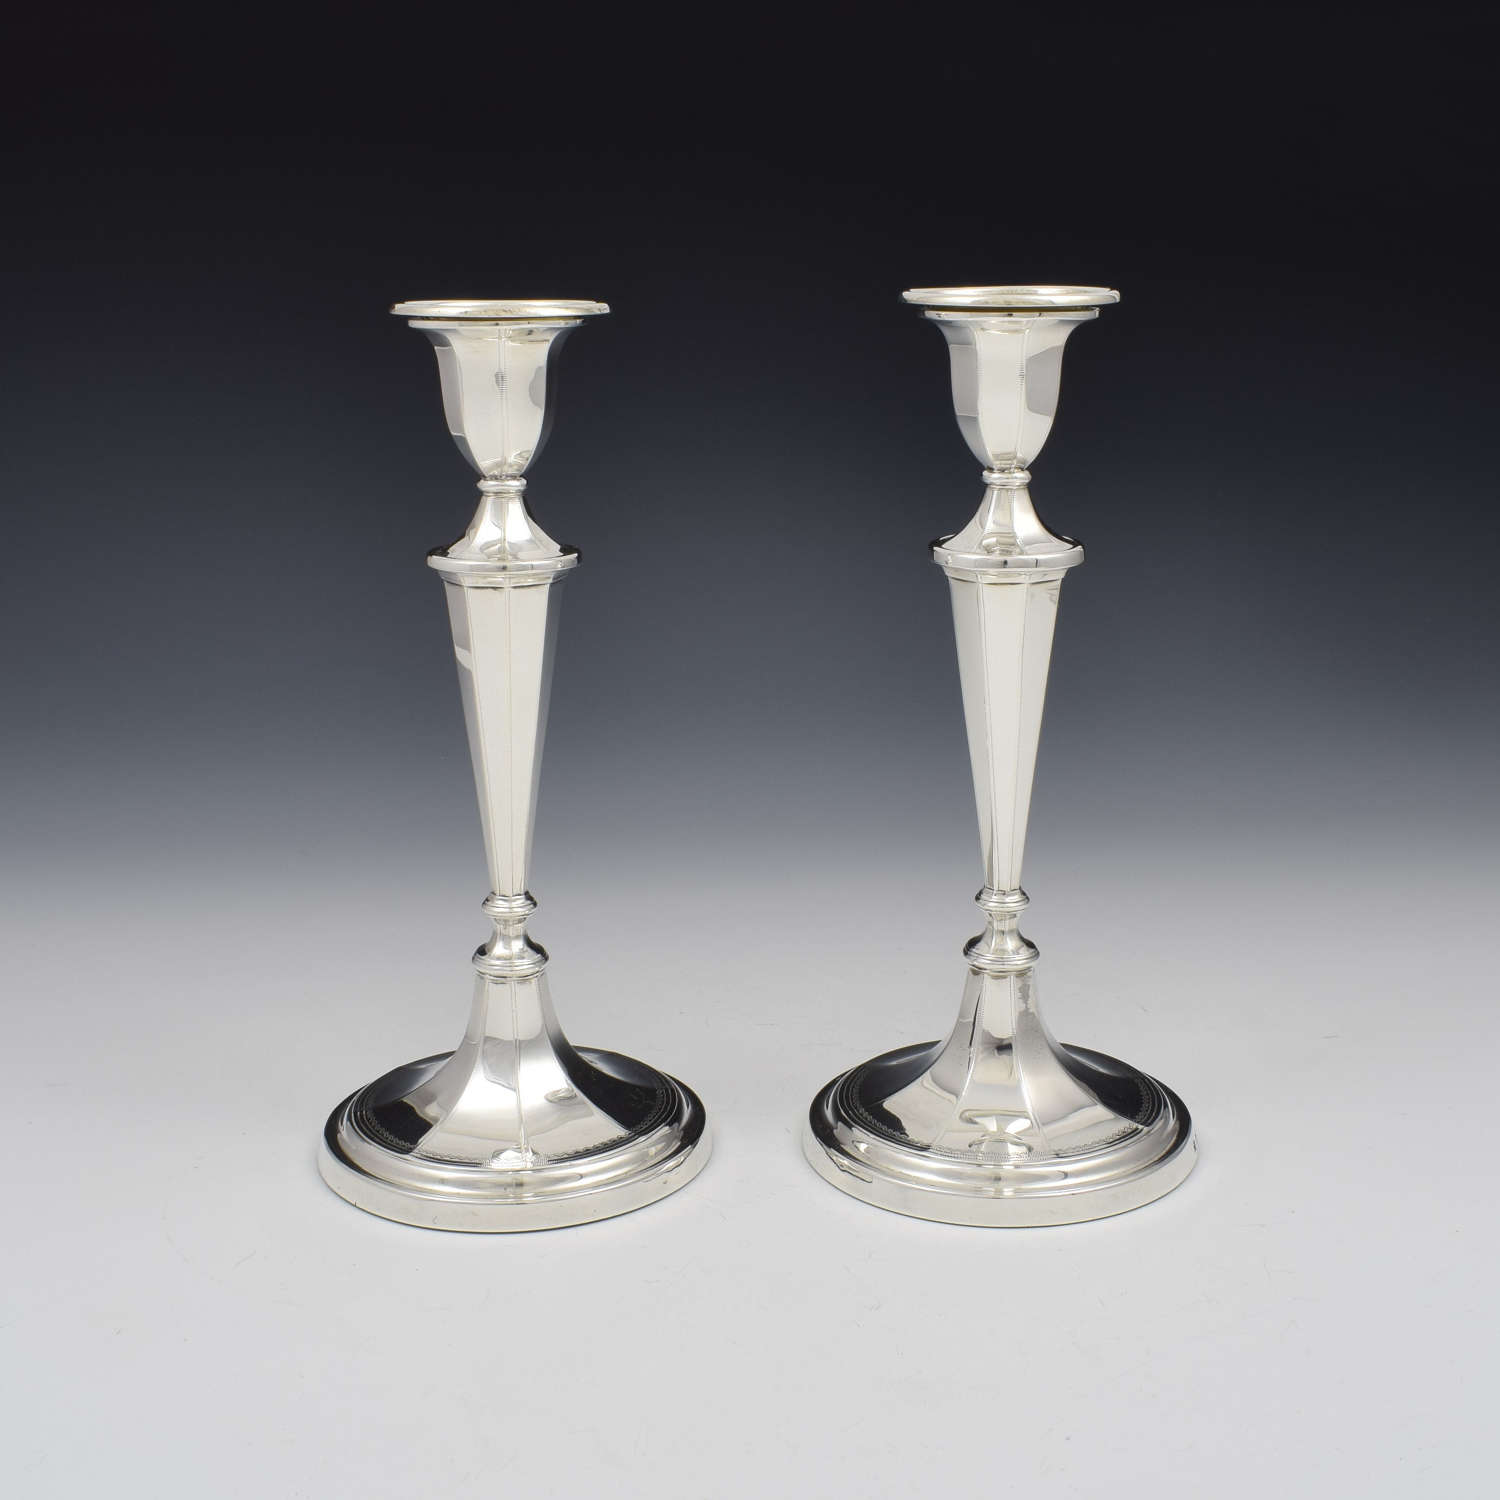 Pair Of Silver Candlesticks 8 1/4